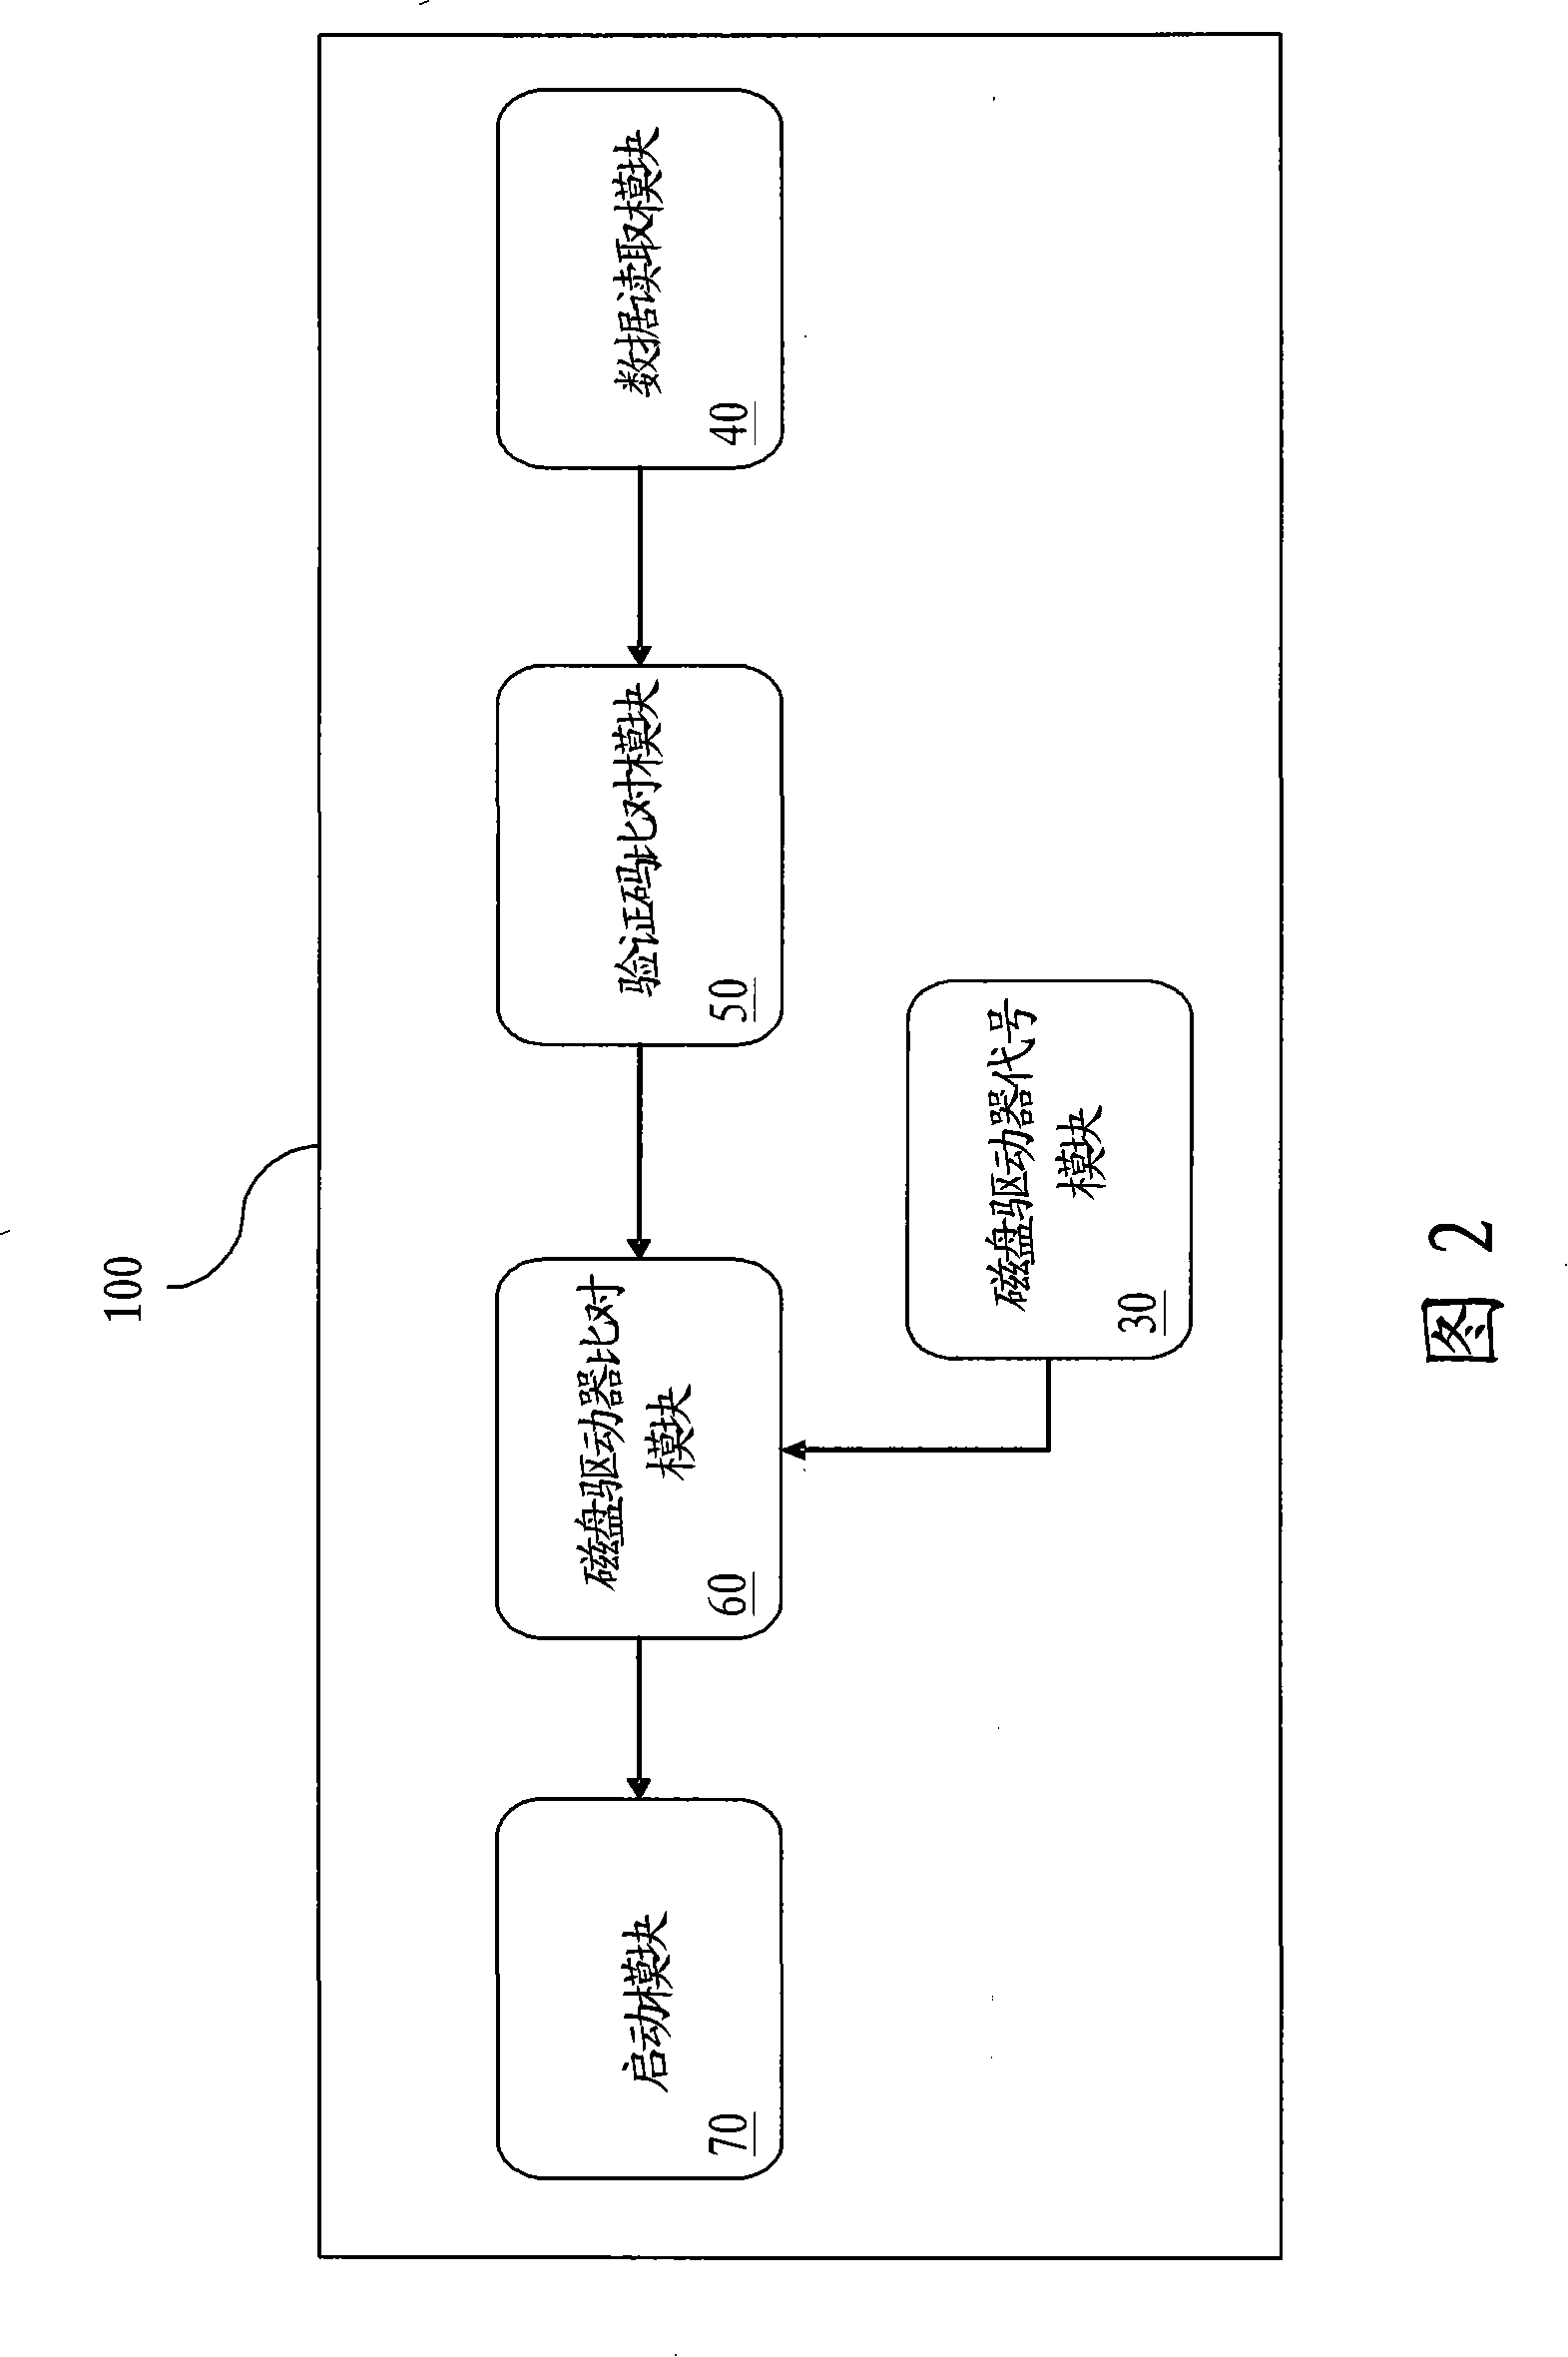 Starting protection system for portable execution program and method thereof